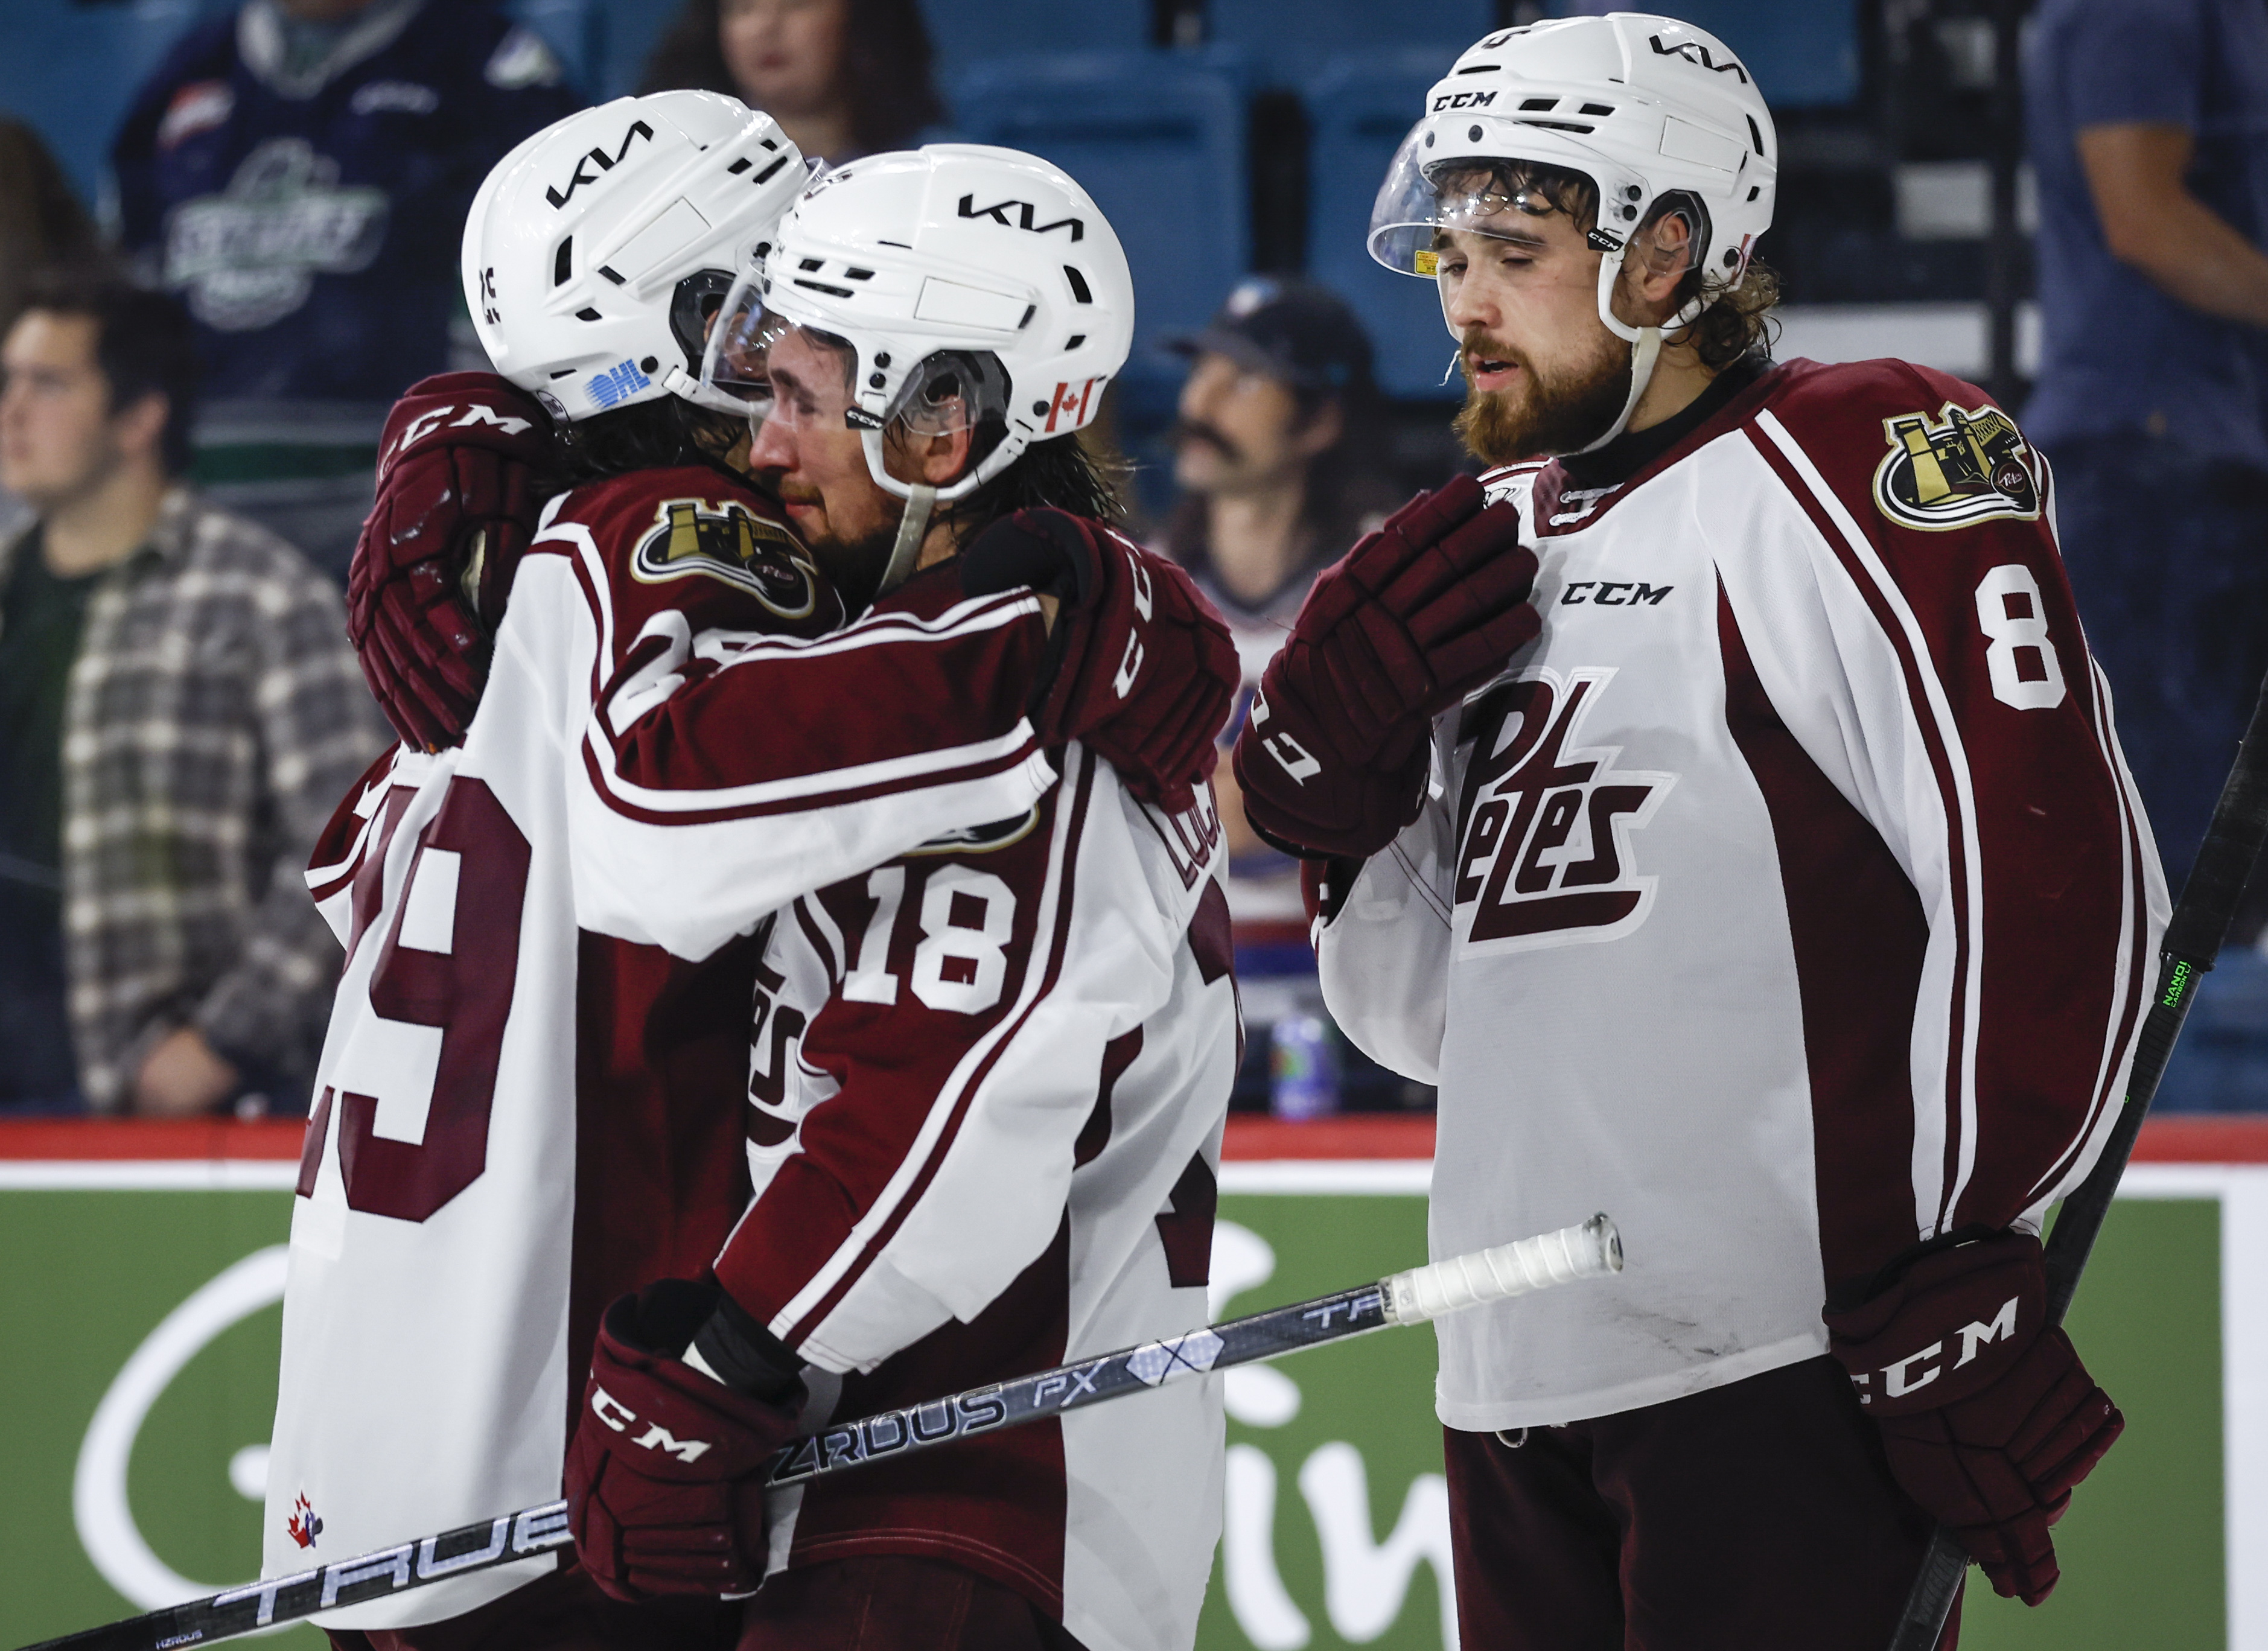 Peterborough Petes’ quest for Memorial Cup ends with 4-1 semifinal loss